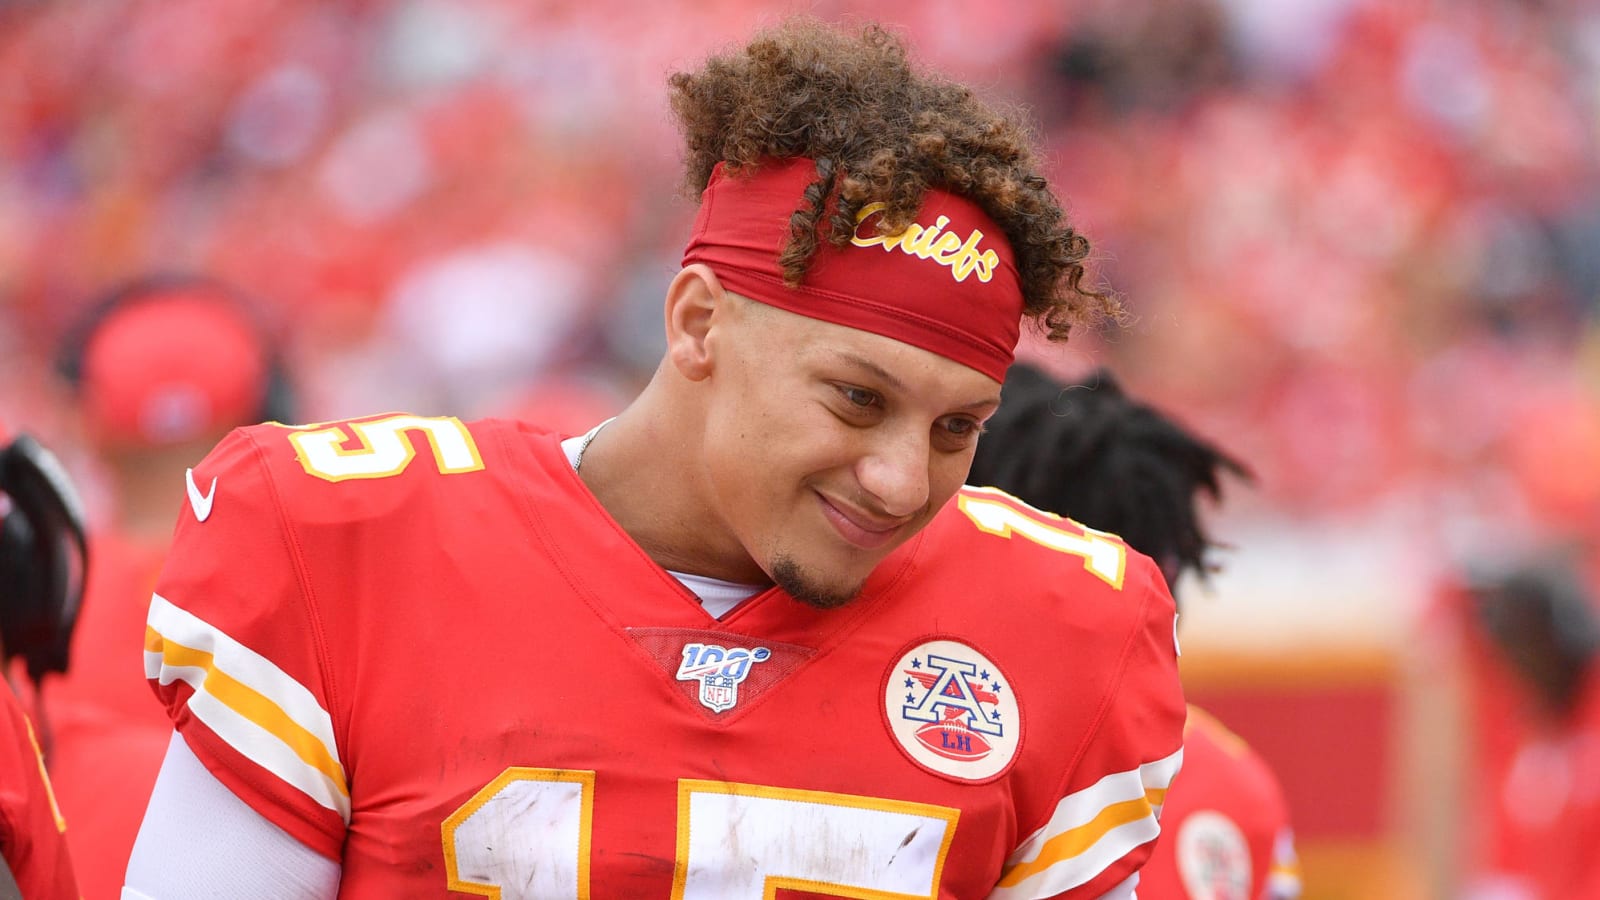 Bears Fan's Patrick Mahomes Jersey Was Perfect Symbol for Sunday's